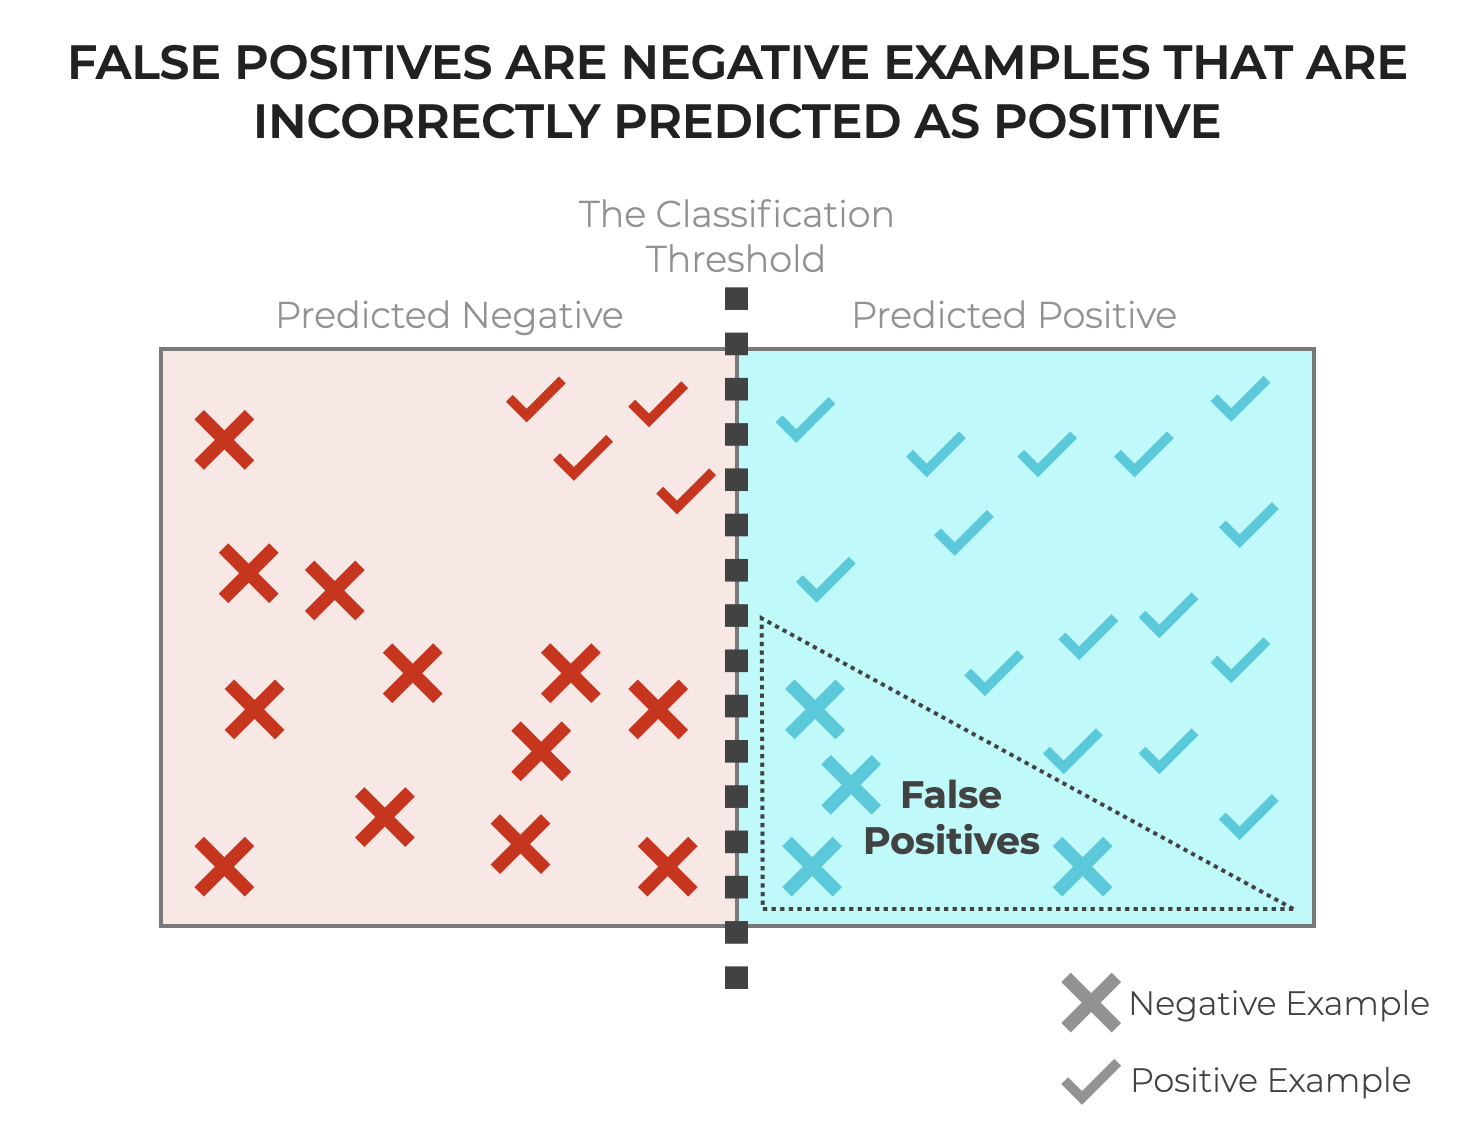 An image that shows False Positives, and how they relate to TP, TN, FN, and classification threshold.